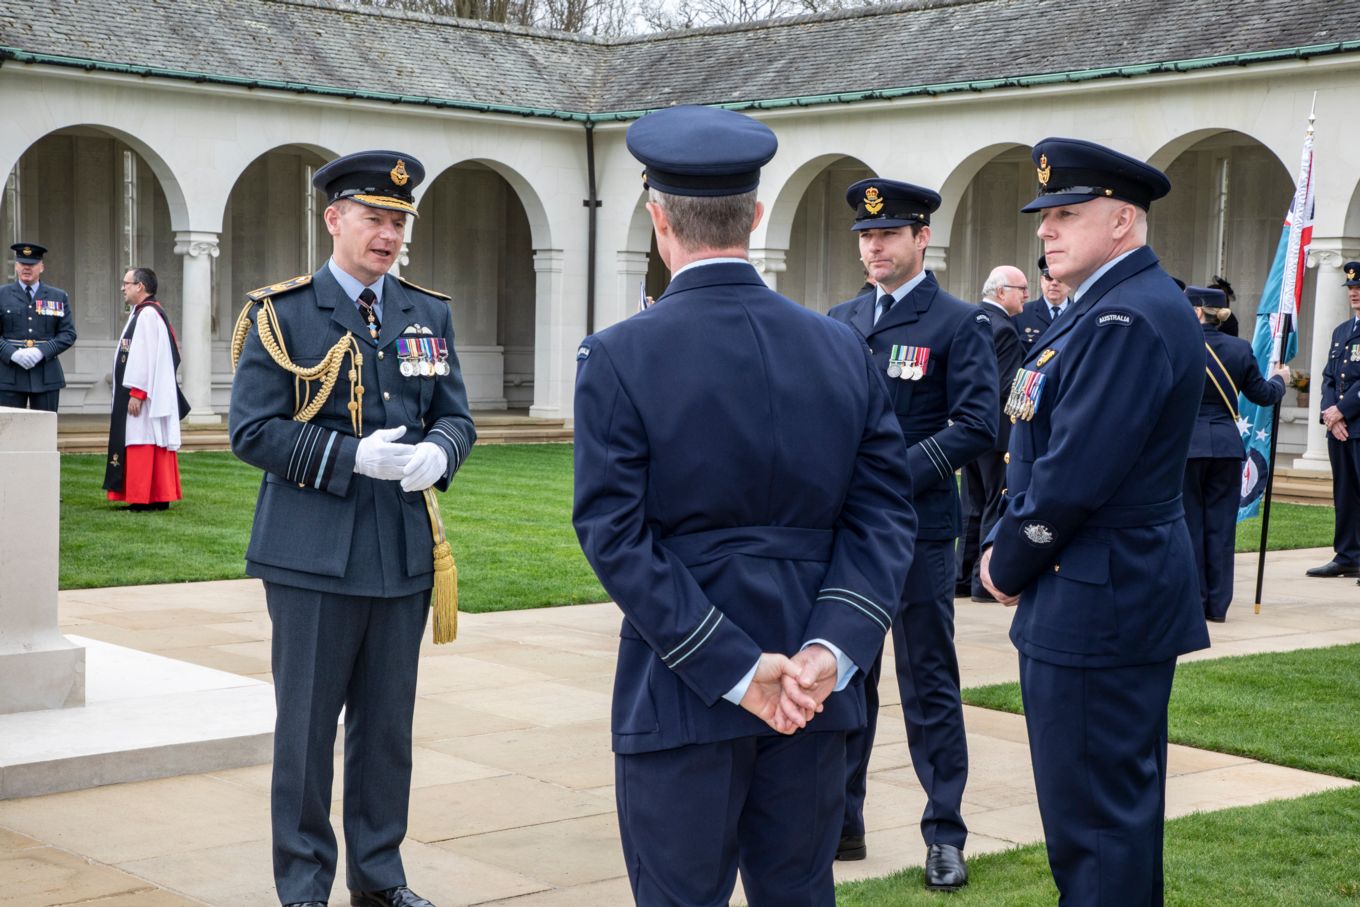 ACM Wigston in conversation with members from the Royal Australian Air Force